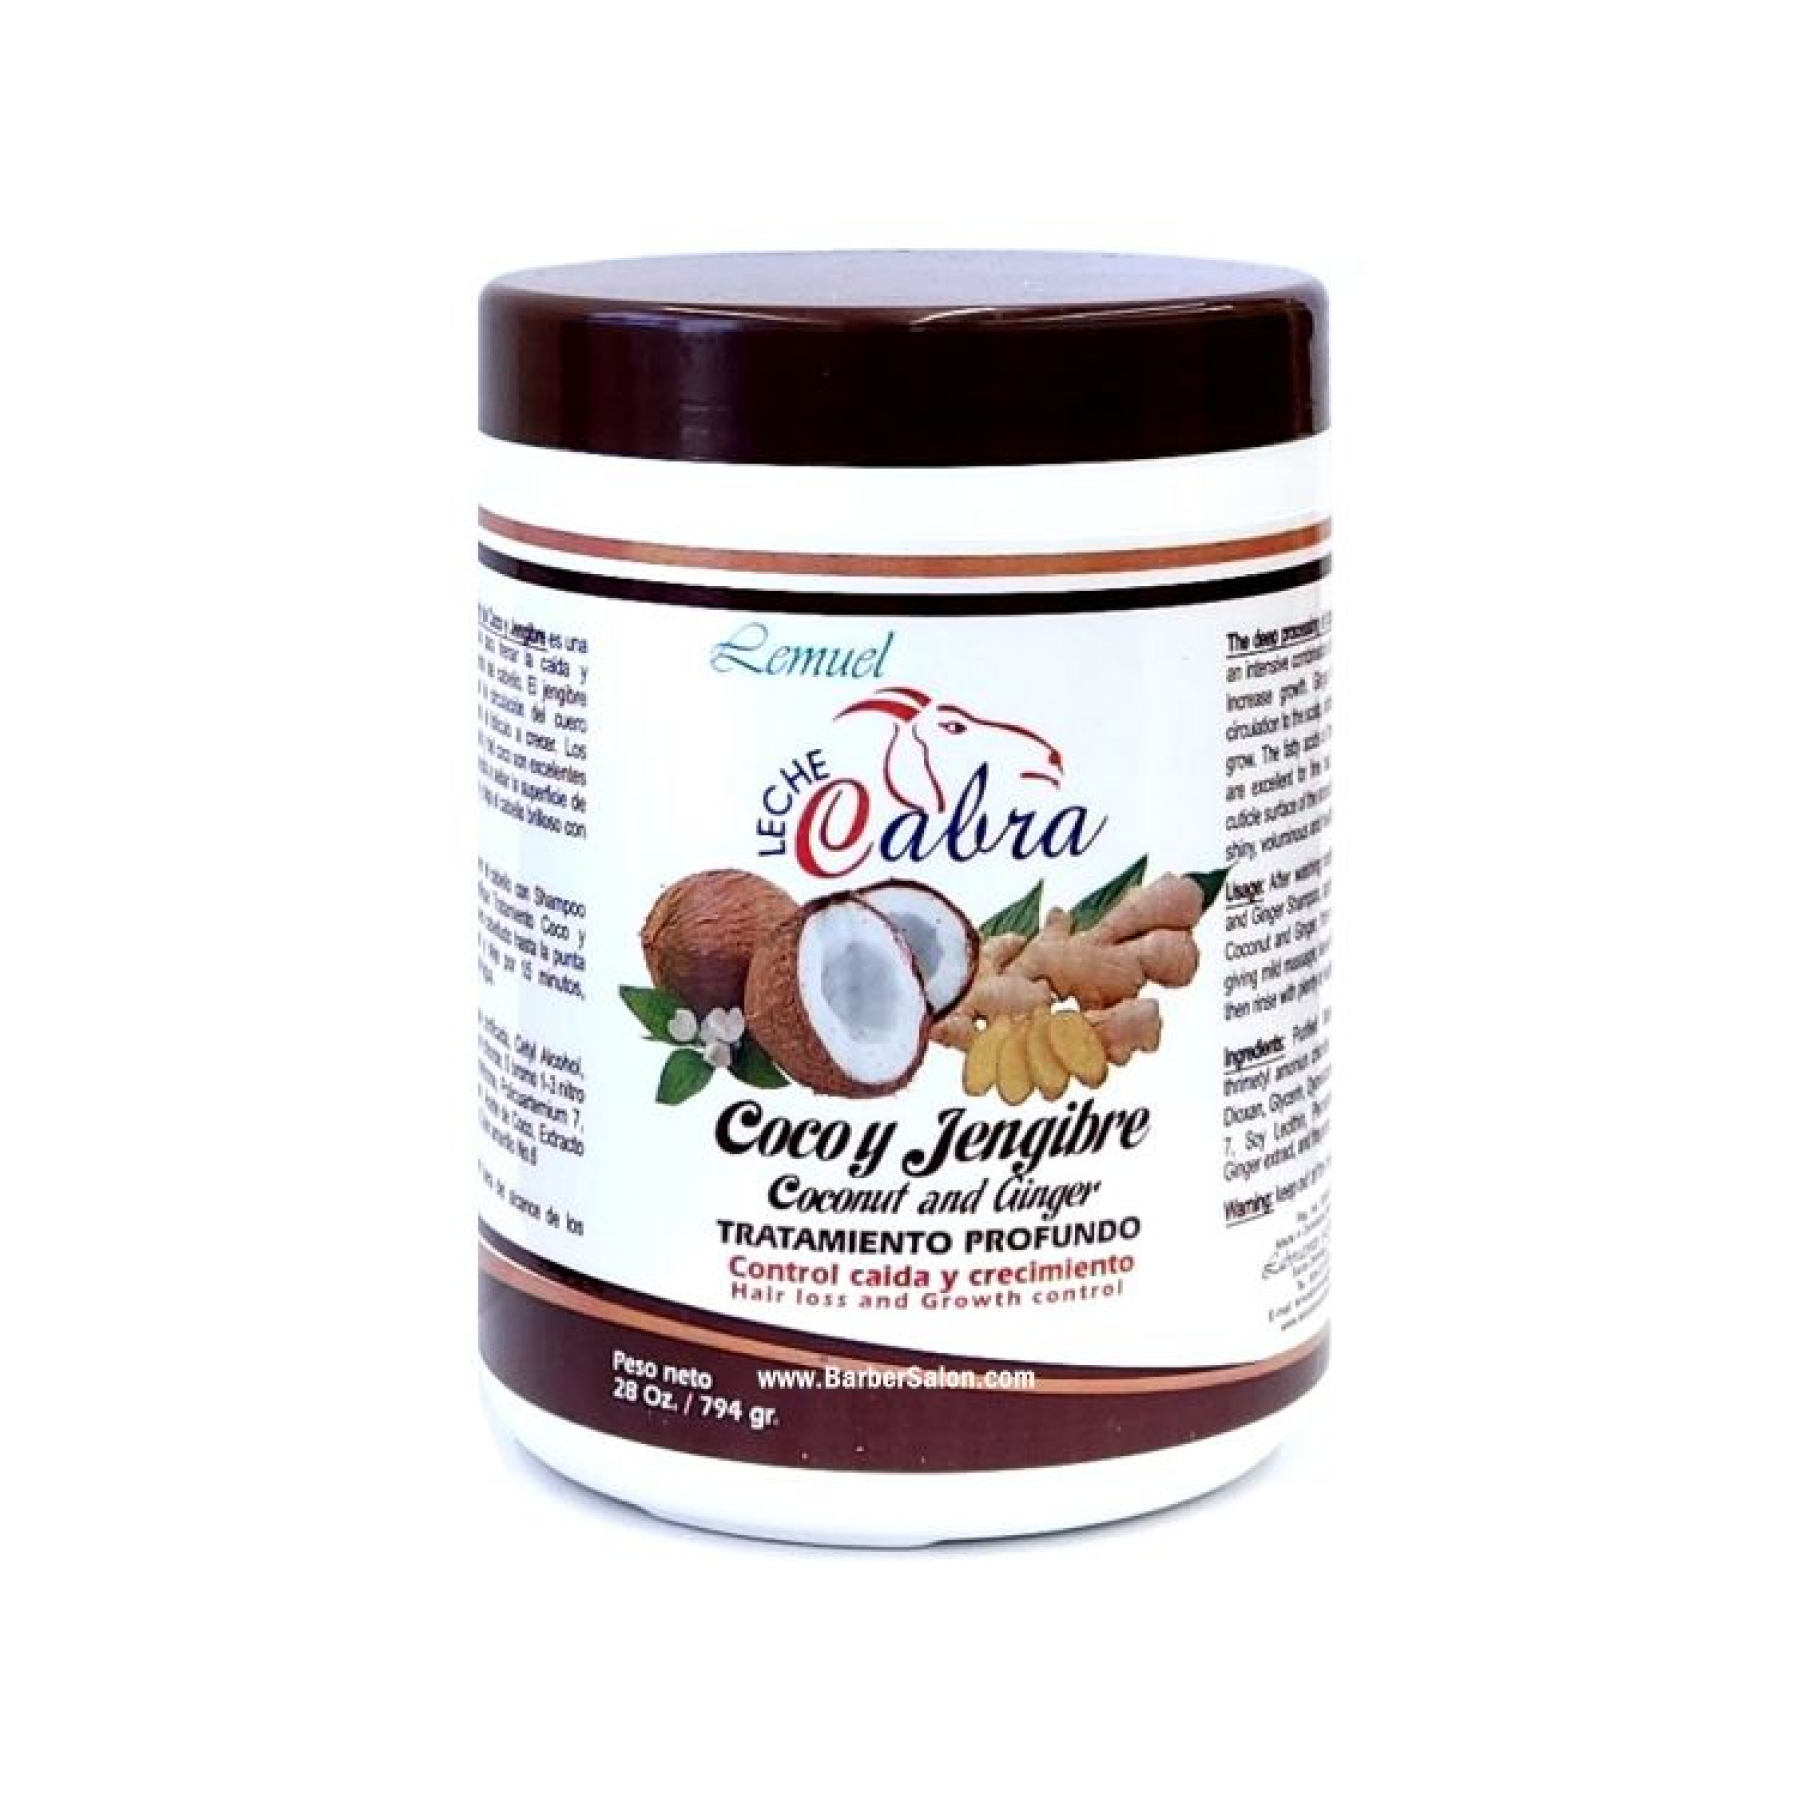 Lemuel Coconut And Ginger Treatment 28 oz